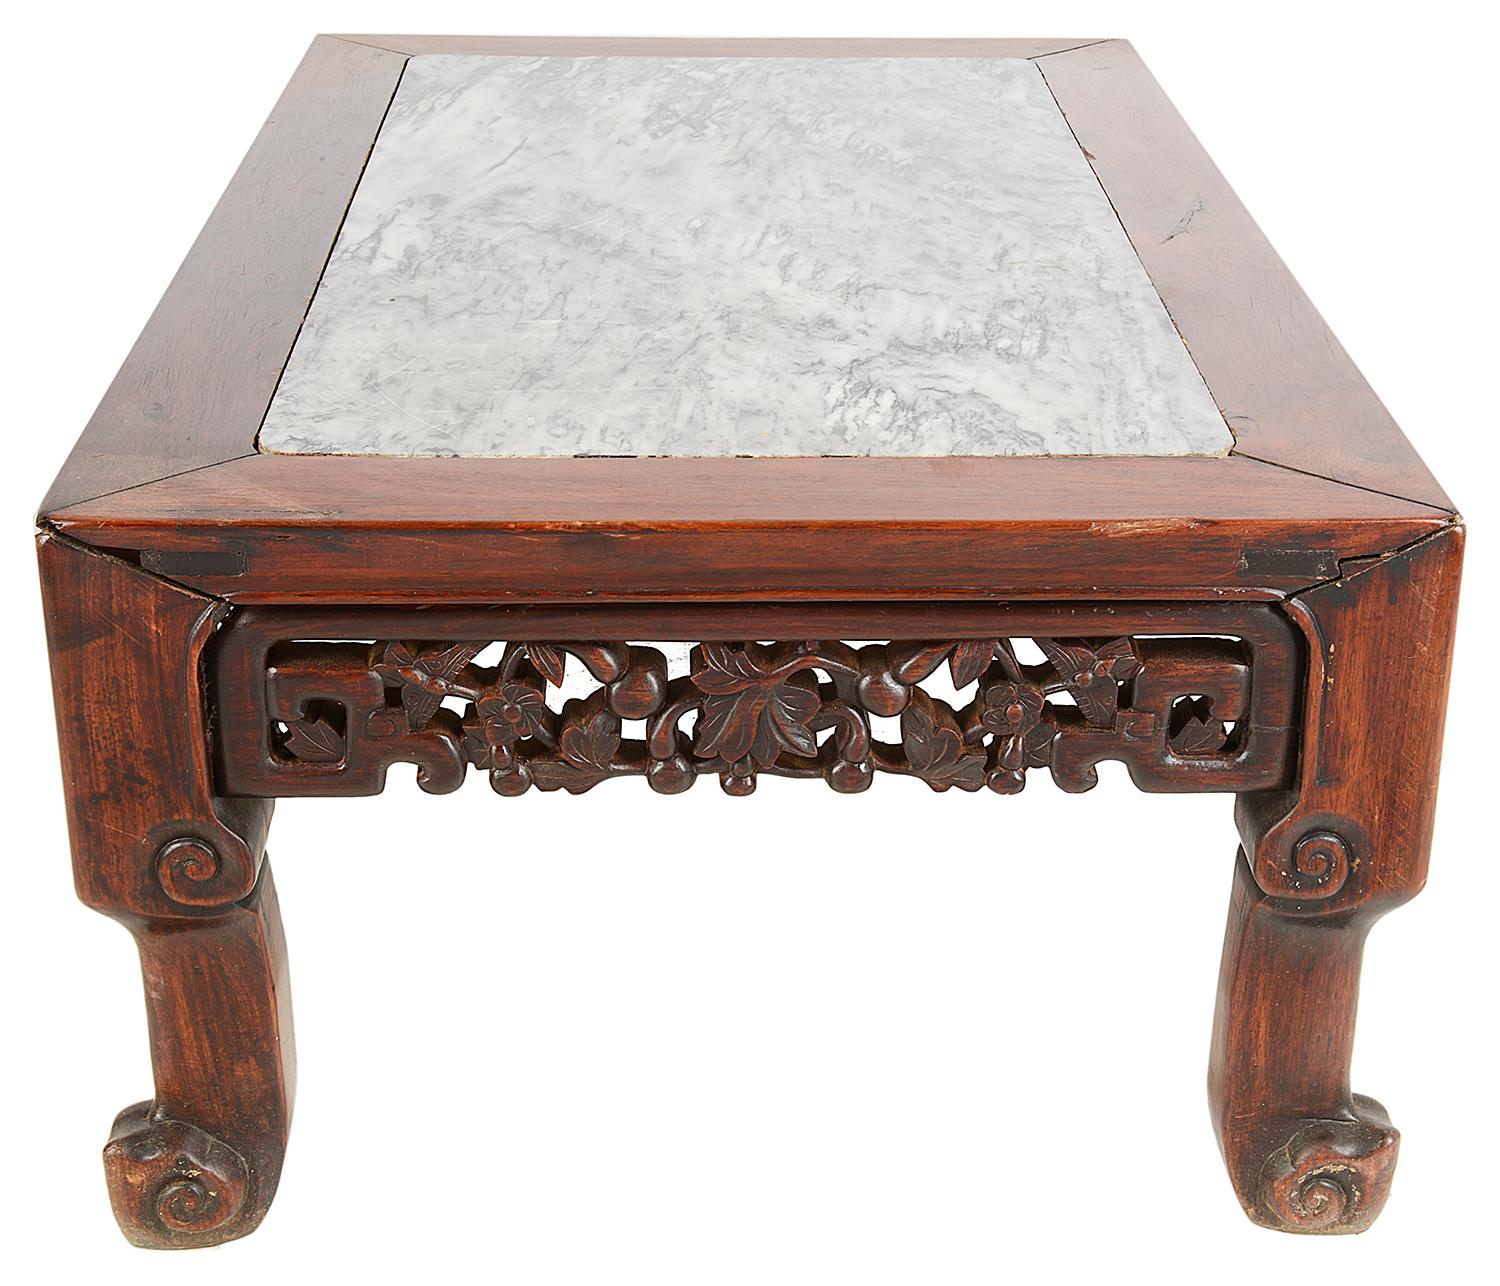 A good quality late 19th century Chinese hardwood Opium table or coffee table. Having an inset figured grey marble top, carved leaves and berries to the frieze and raised on four scrolling legs.